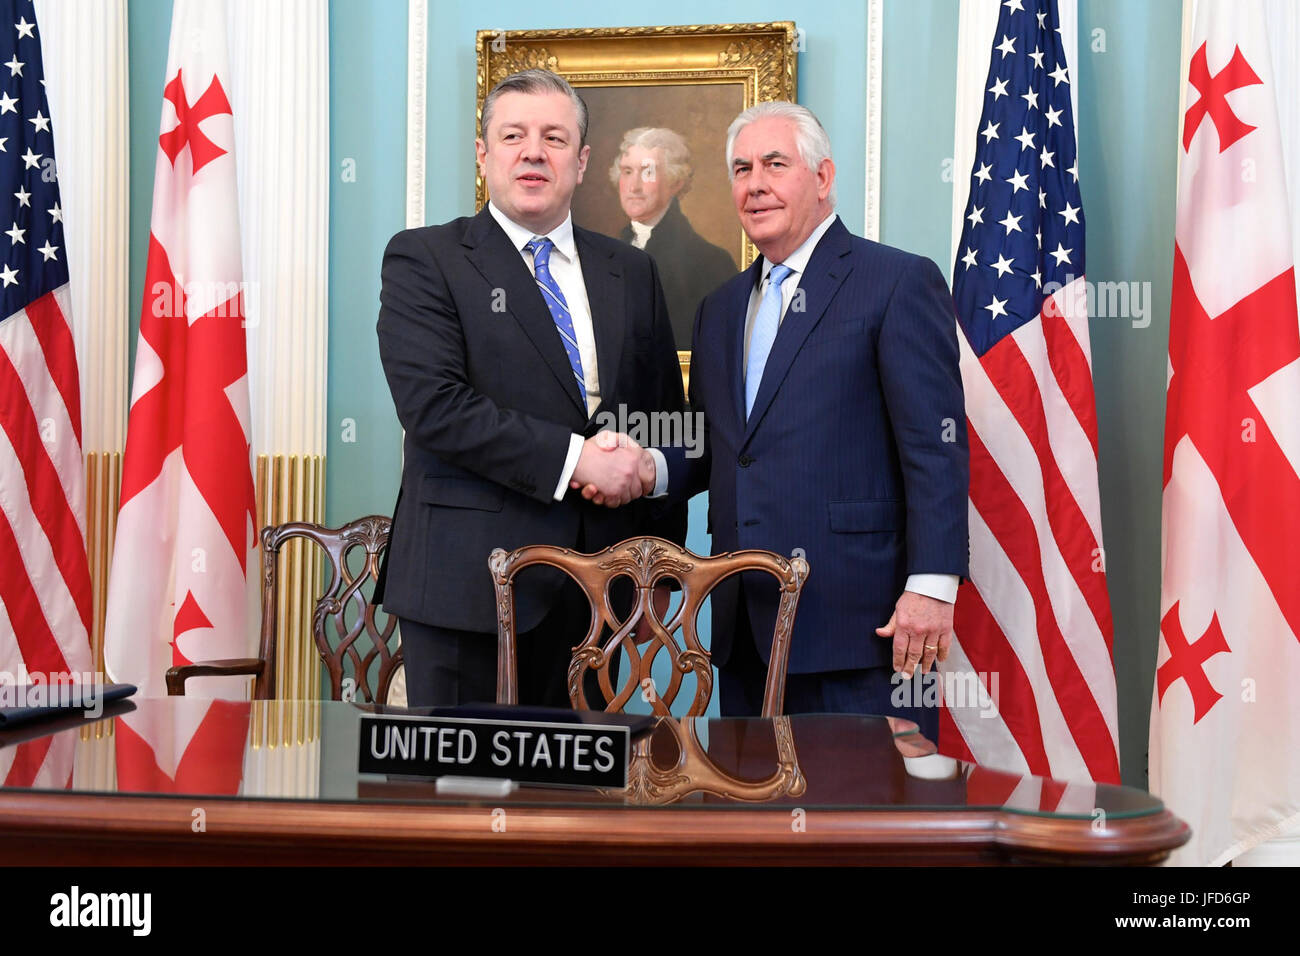 U.S. Secretary of State Rex Tillerson shakes hands with Georgian Prime Minister Giorgi Kvirikashvili after signing the the U.S.-Georgia General Security of Information Agreement at the U.S. Department of State in Washington, D.C., on May 9, 2017. Stock Photo